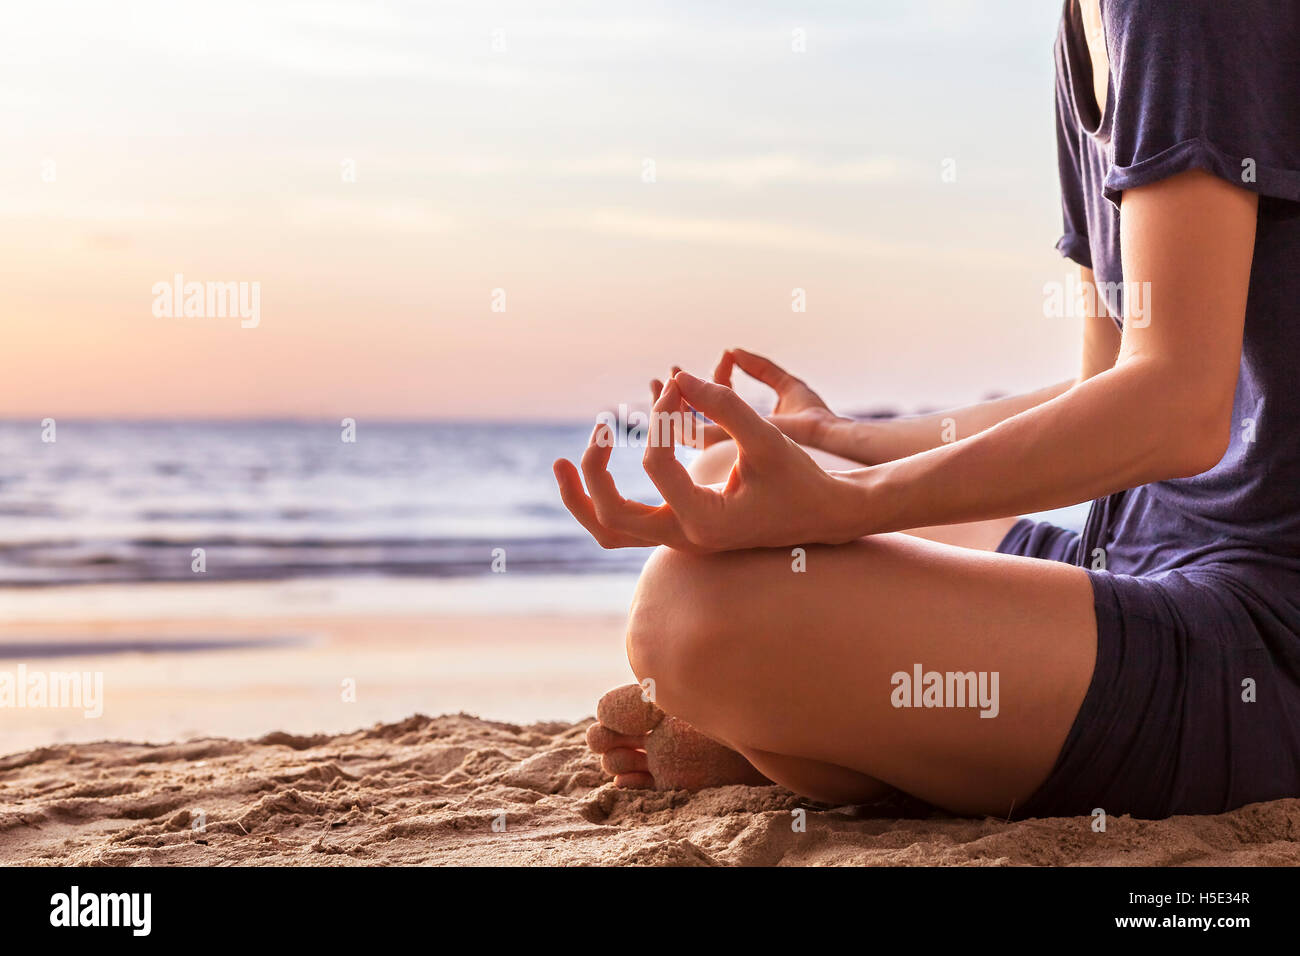 Young woman relaxing by practicing yoga on the beach at sunset, close-up of hands, gyan mudra and lotus position Stock Photo